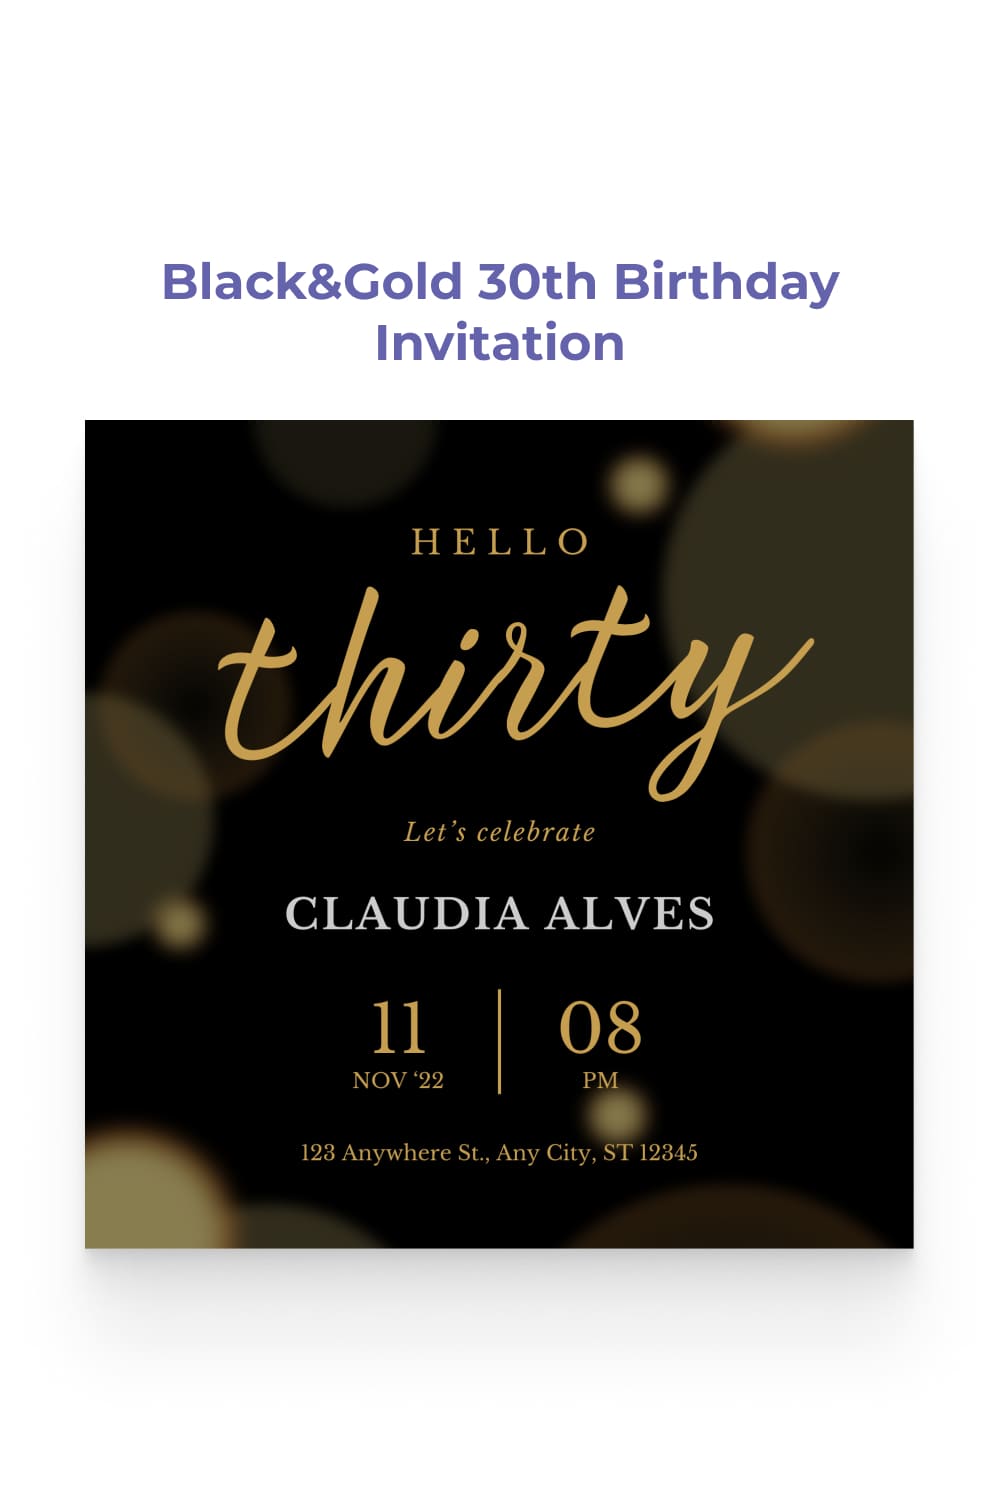 Birthday invitation with dark background and golden accents.